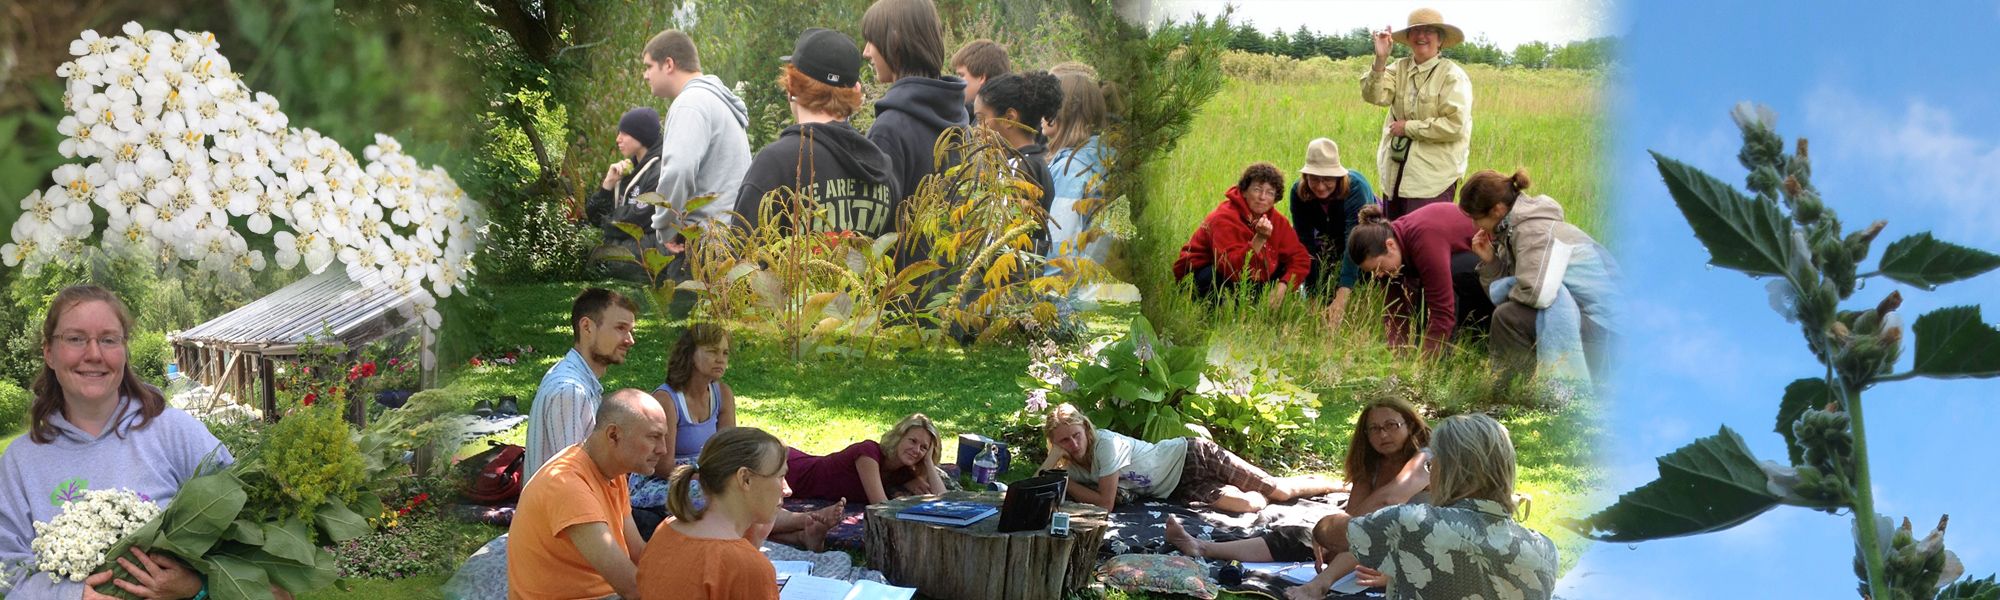 Collage of photos of herbal medicine plants & classes in Ontario